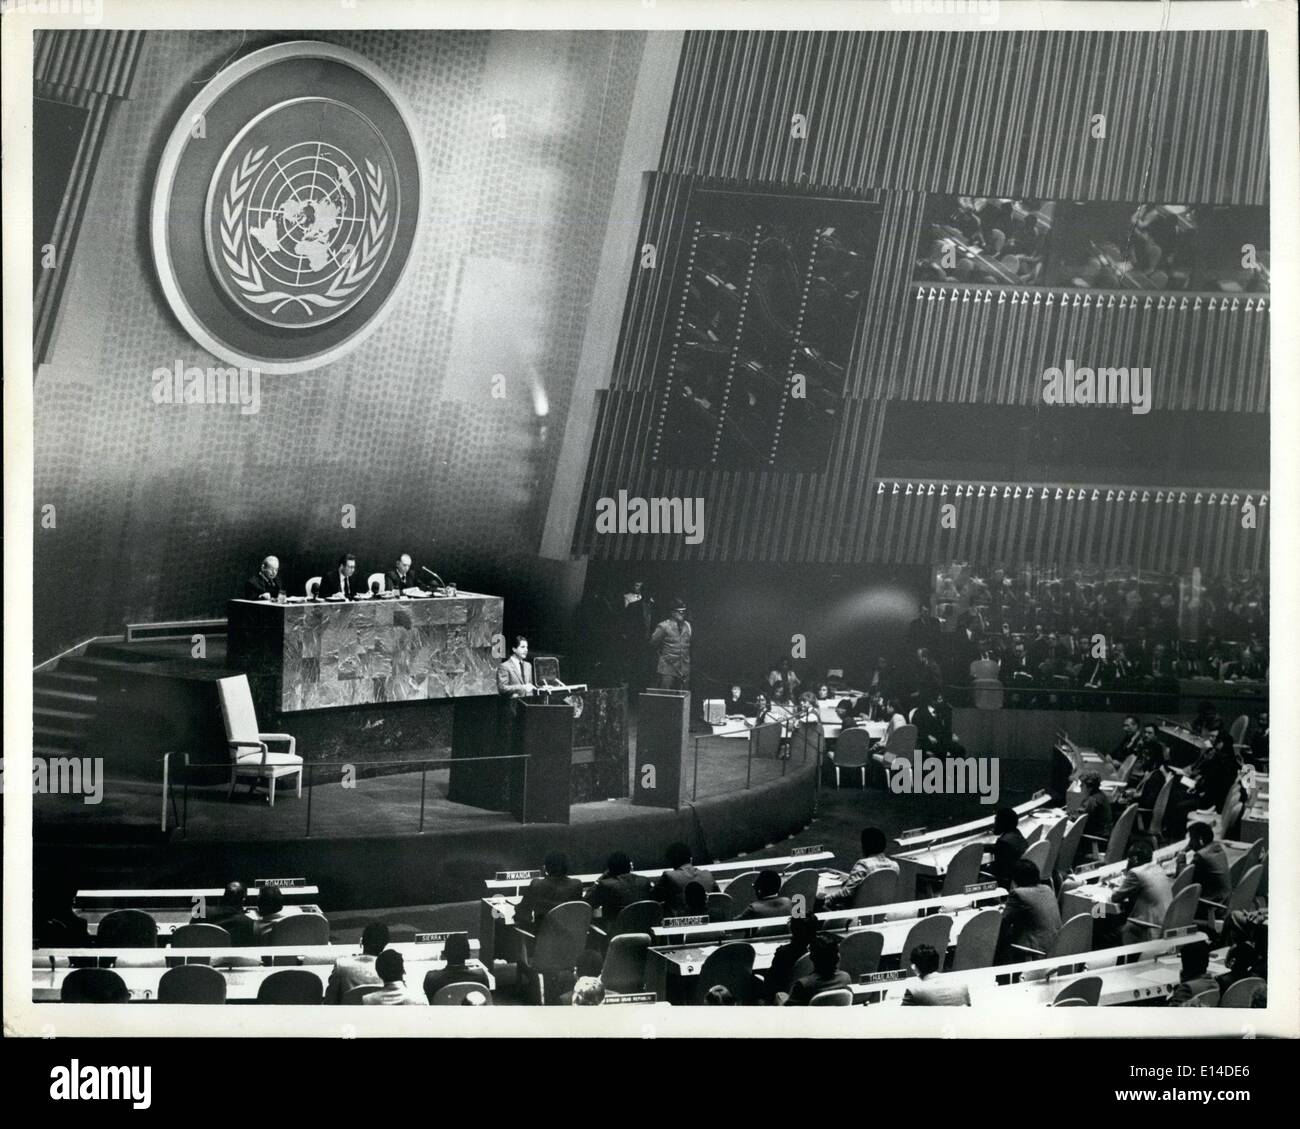 Apr. 18, 2012 - The United Nations, New York City: The Newly Elected President of Lebanon, Sheikh Amin Gemayel ,addressed the General Assembly today During his visit to United Nations Head Qurrters in New York. Photo Shows Sheikh Amin Gemayel in the General Assembly Hall. Stock Photo